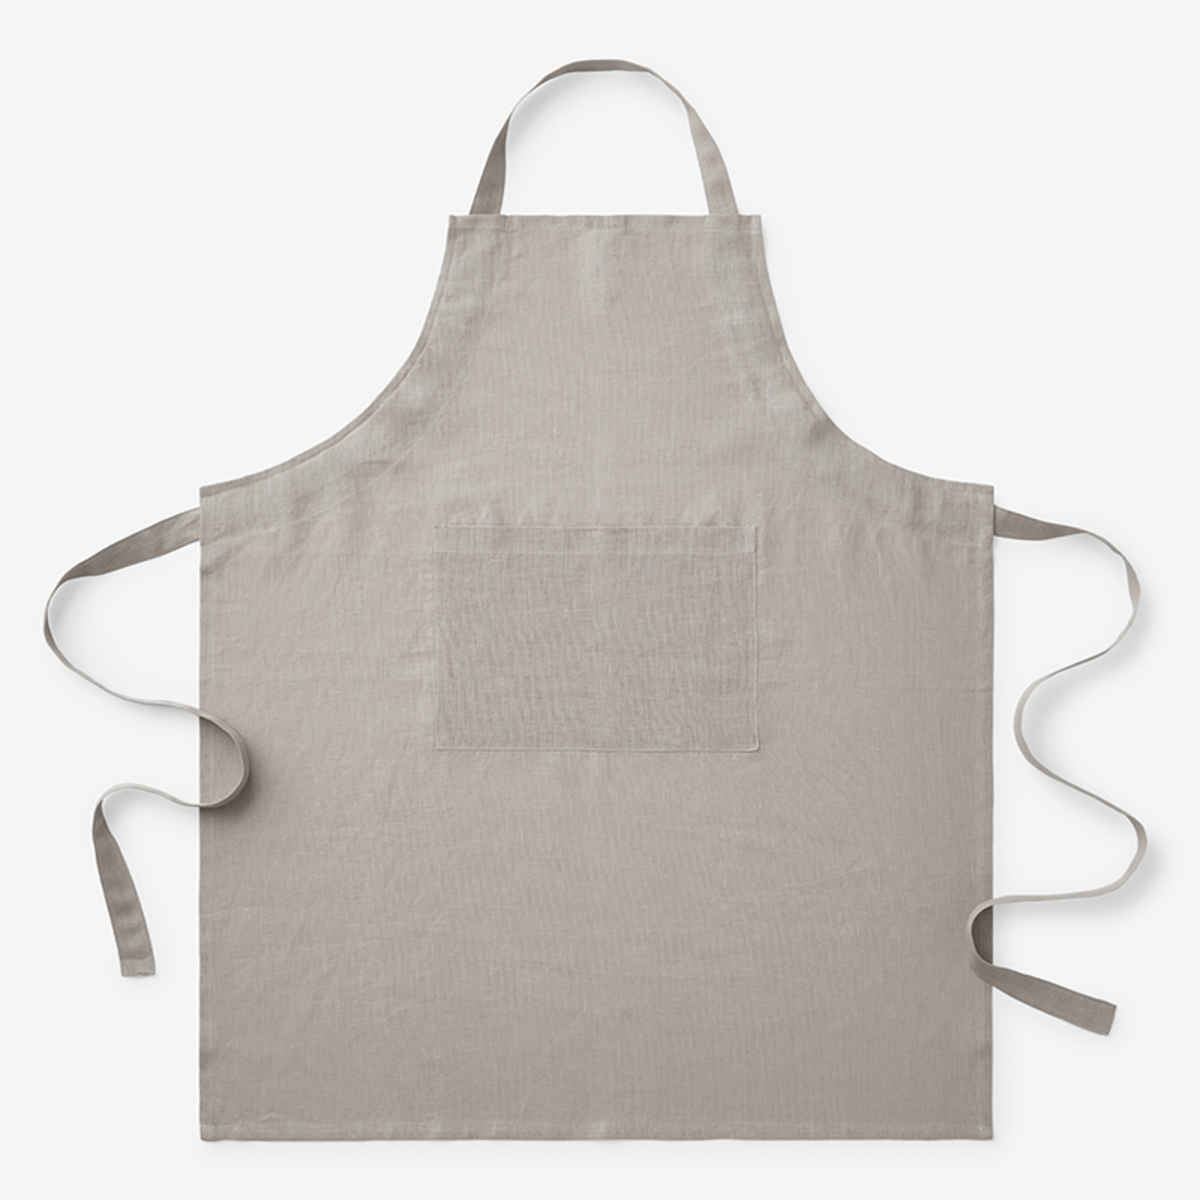 https://companystore-res.cloudinary.com/image/upload/f_auto,q_40,dpr_3.0/w_400,c_scale/webimages/80018e_apron_taupe_main?_s=RAABAB0